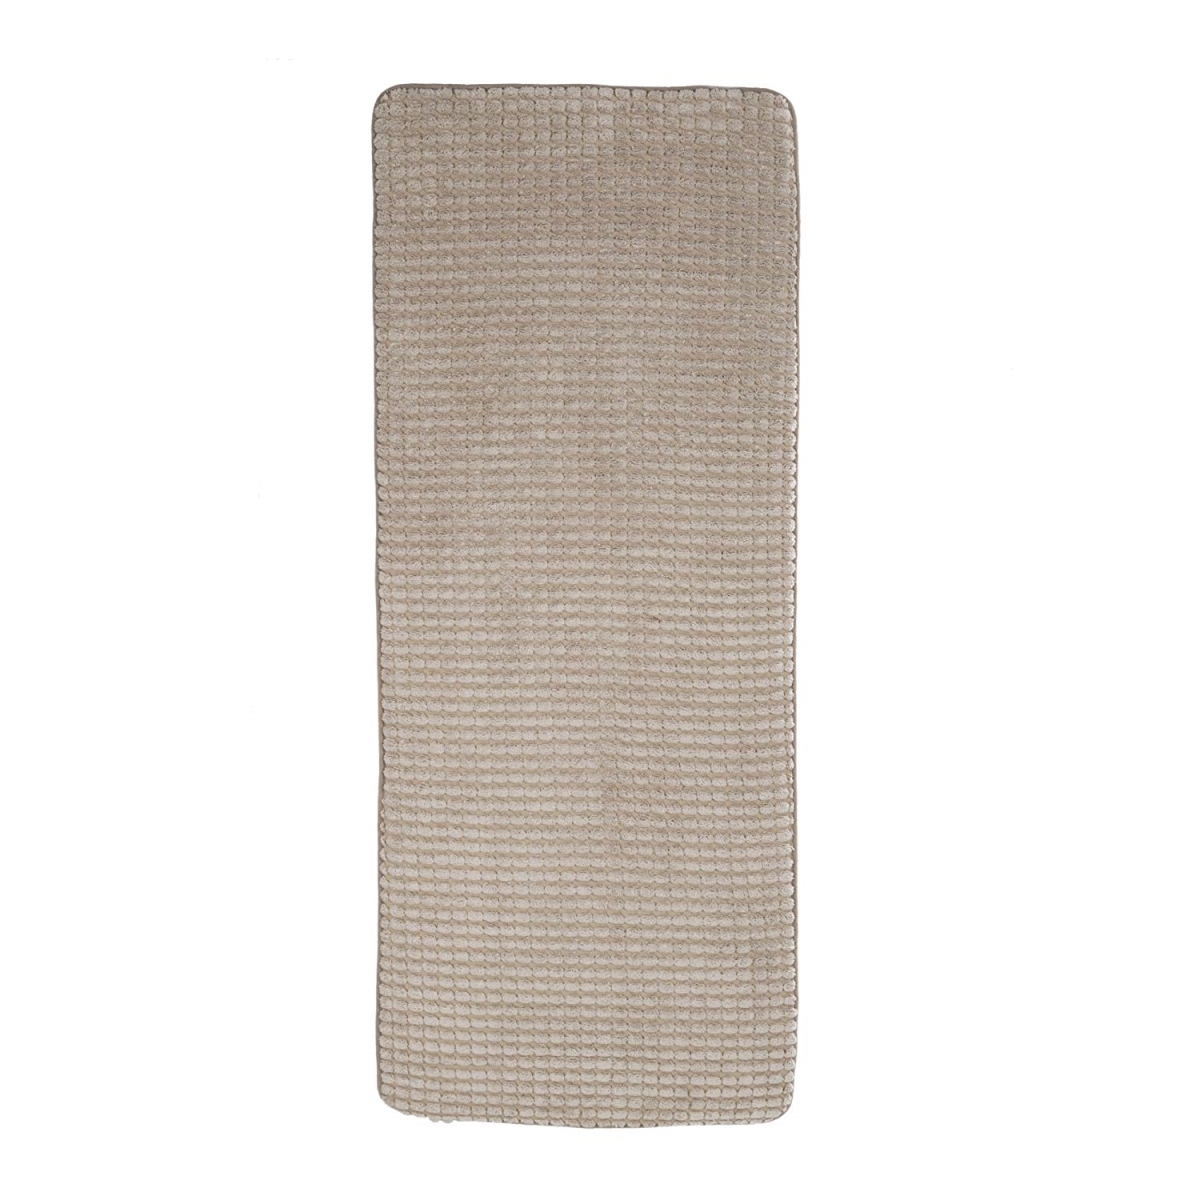 Picture of Bedford Home 67A-23437 24 x 59 in. Memory Foam Extra Long Bath Mat by Woven Jacquard Fleece - Taupe